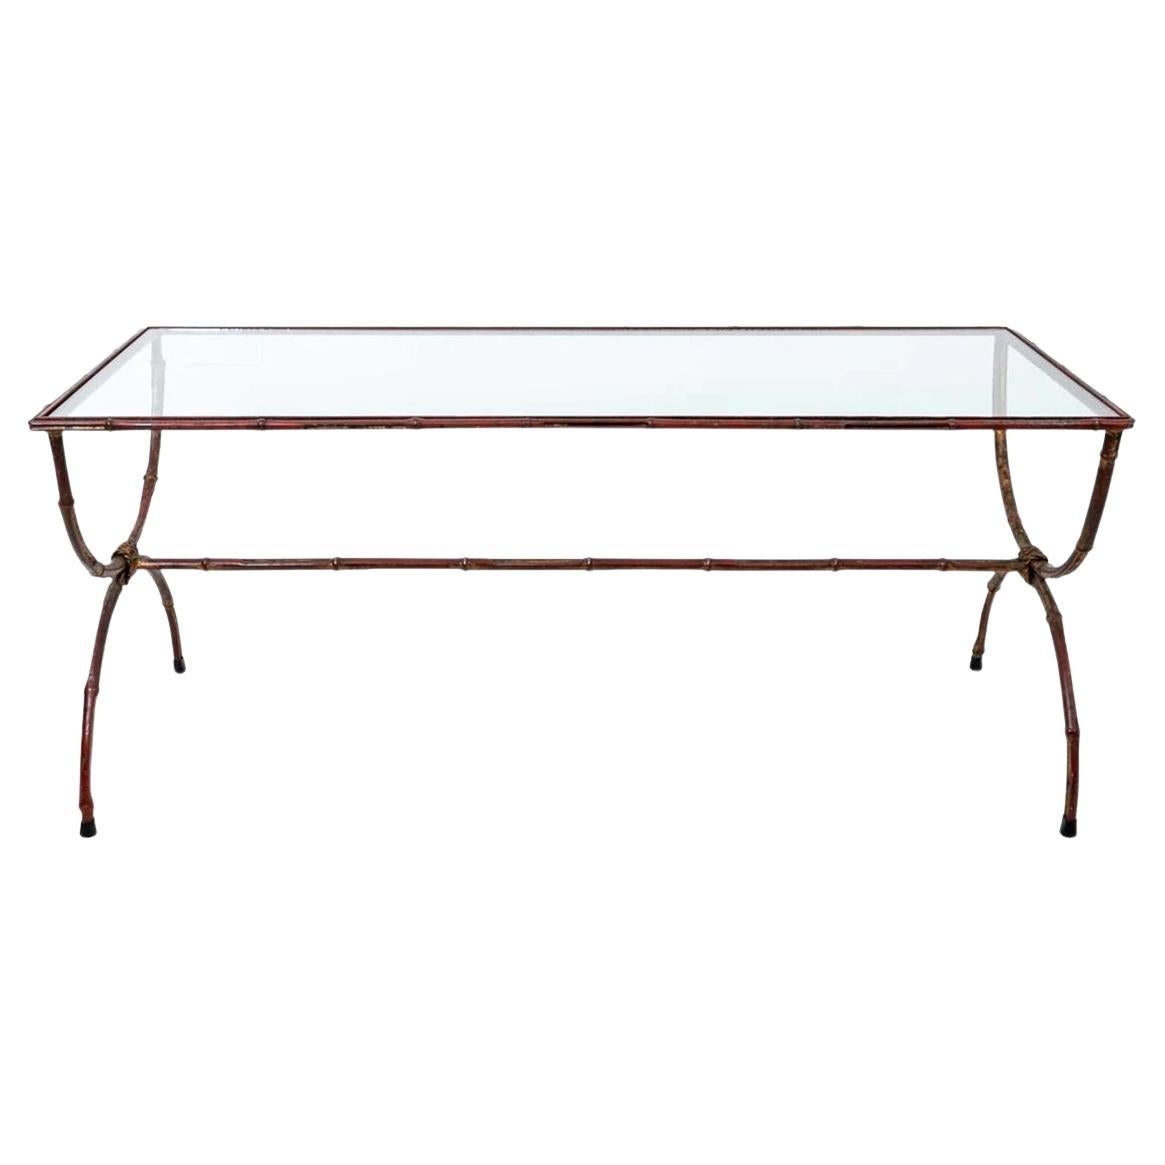 Gilt metal Faux Bamboo and Glass Insert Coffee Table. Distressed gilt finish for a nice warm feel. Marked Italy on underside. Good overall distressed finish, Sturdy and ready to use.